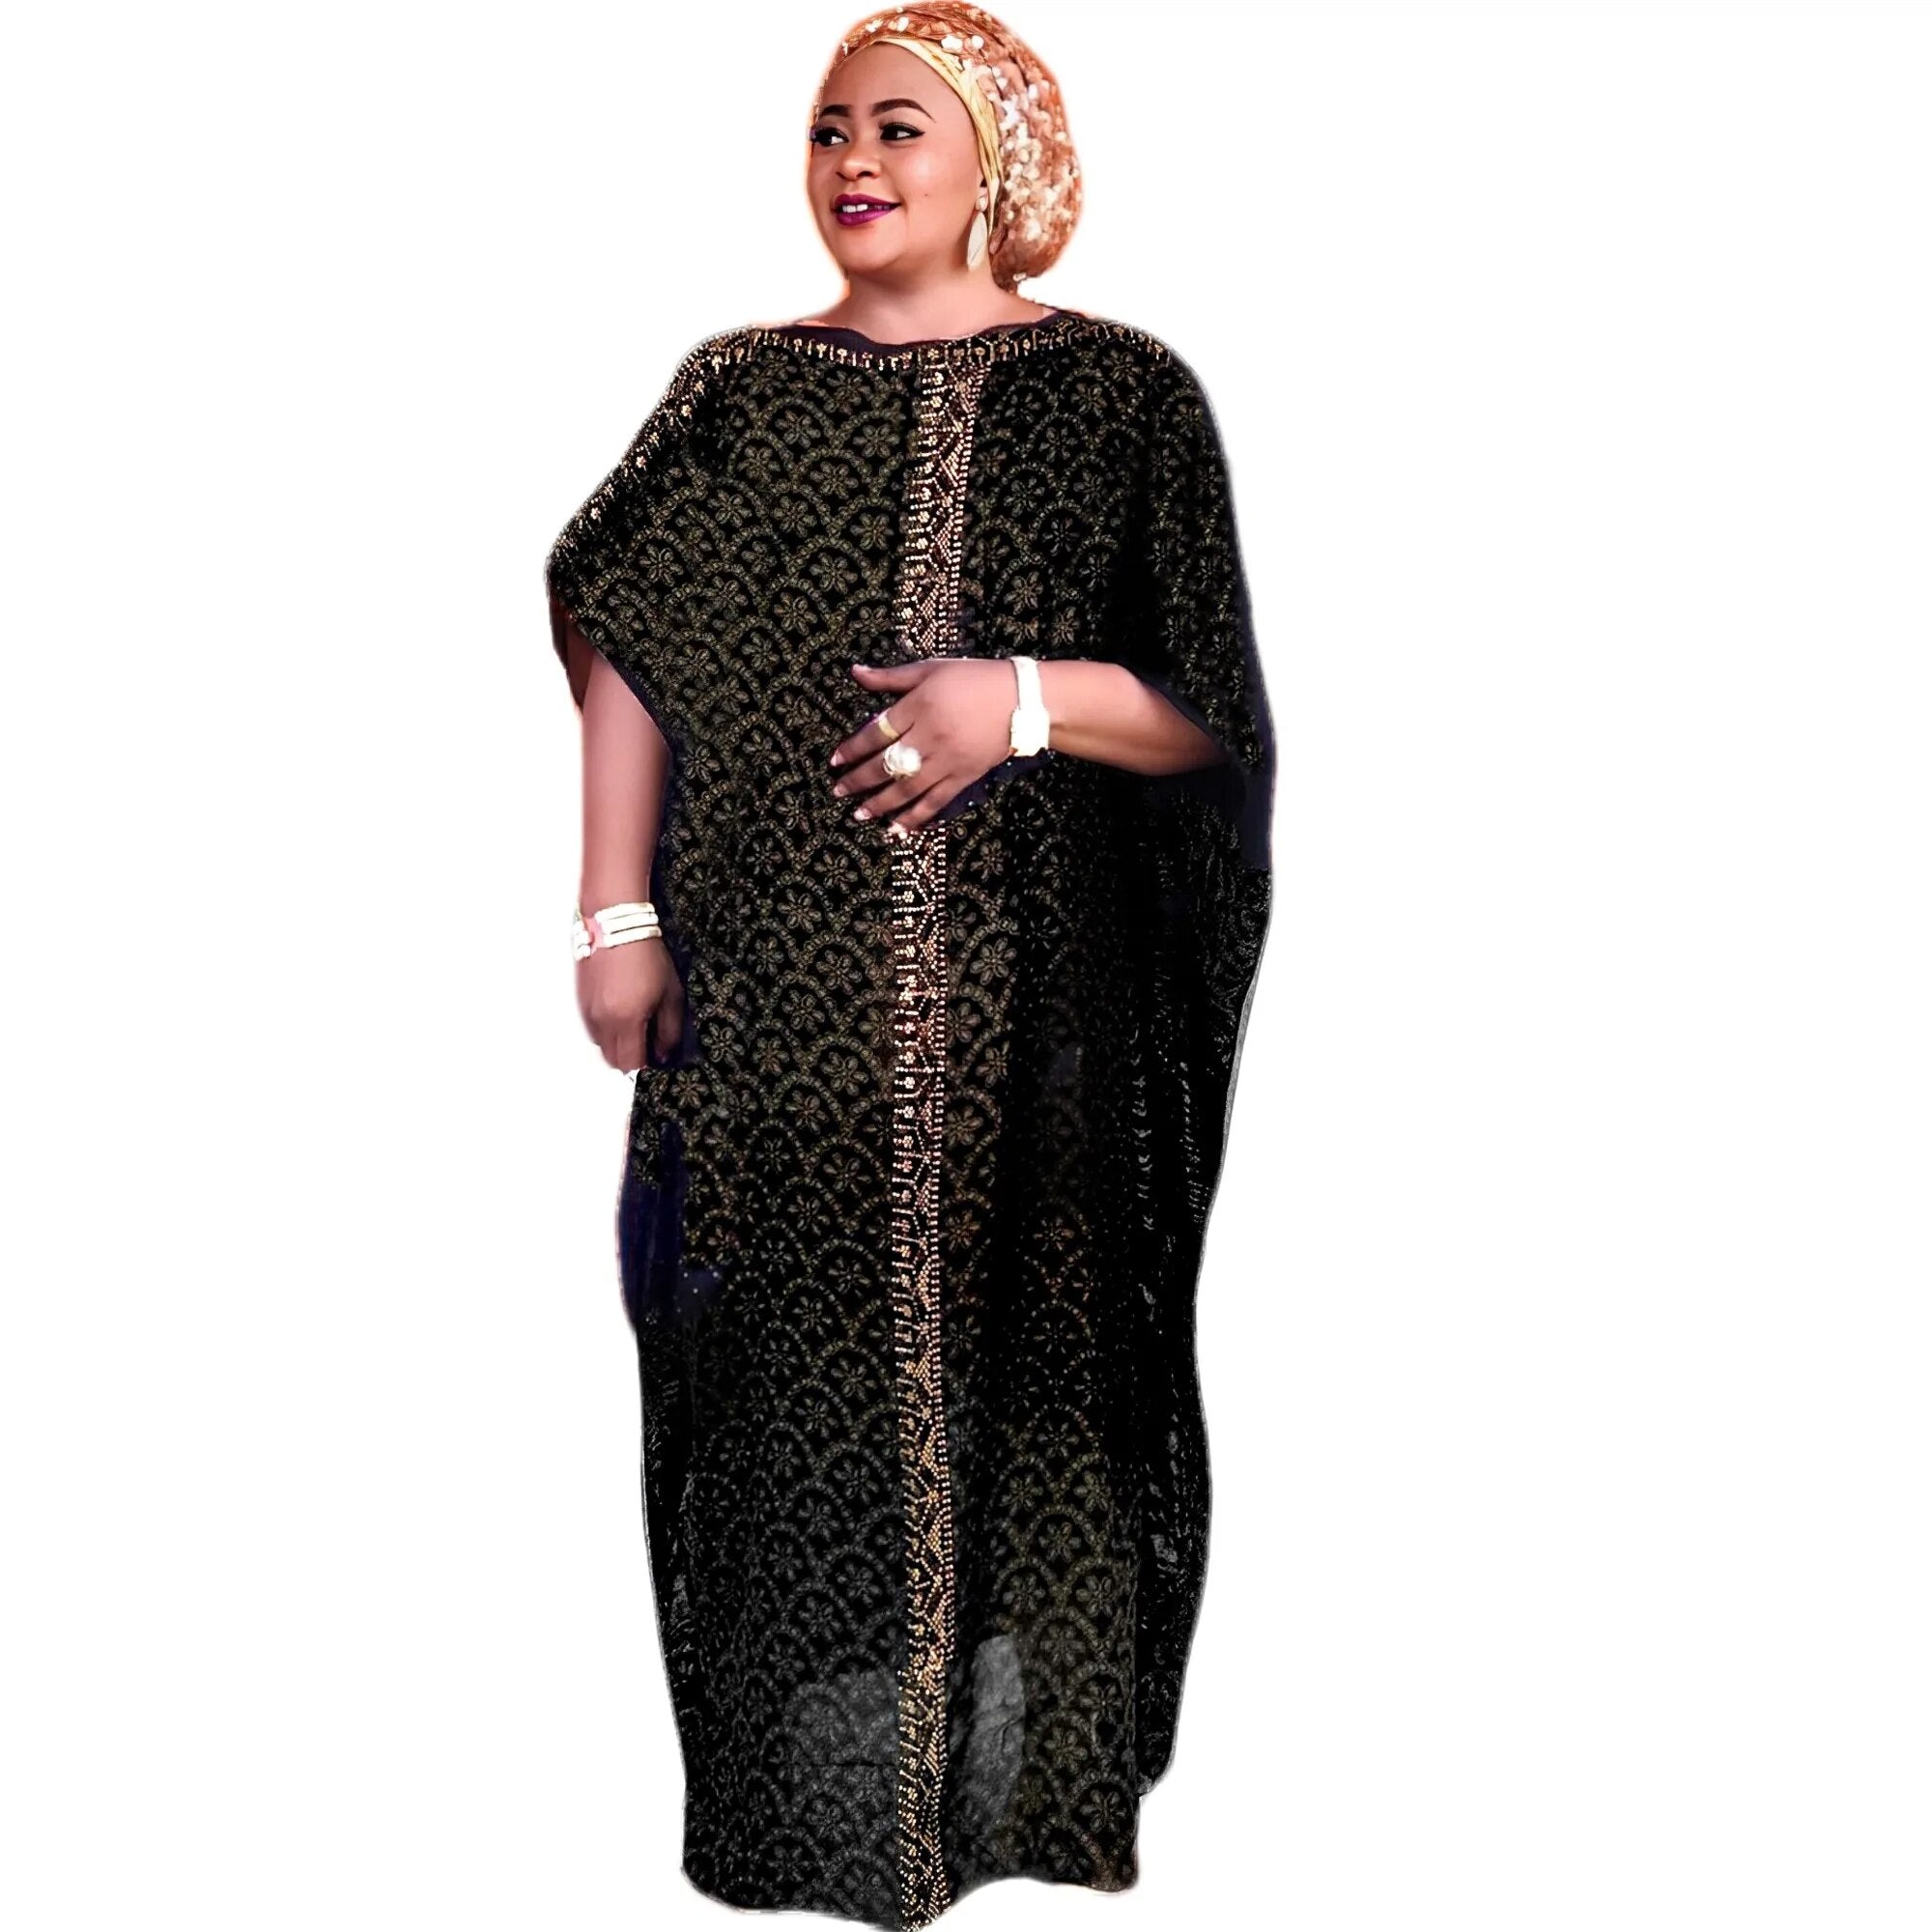 Diamond Printed Chiffon Dashiki Long African Dresses for Women - Flexi Africa - Flexi Africa offers Free Delivery Worldwide - Vibrant African traditional clothing showcasing bold prints and intricate designs